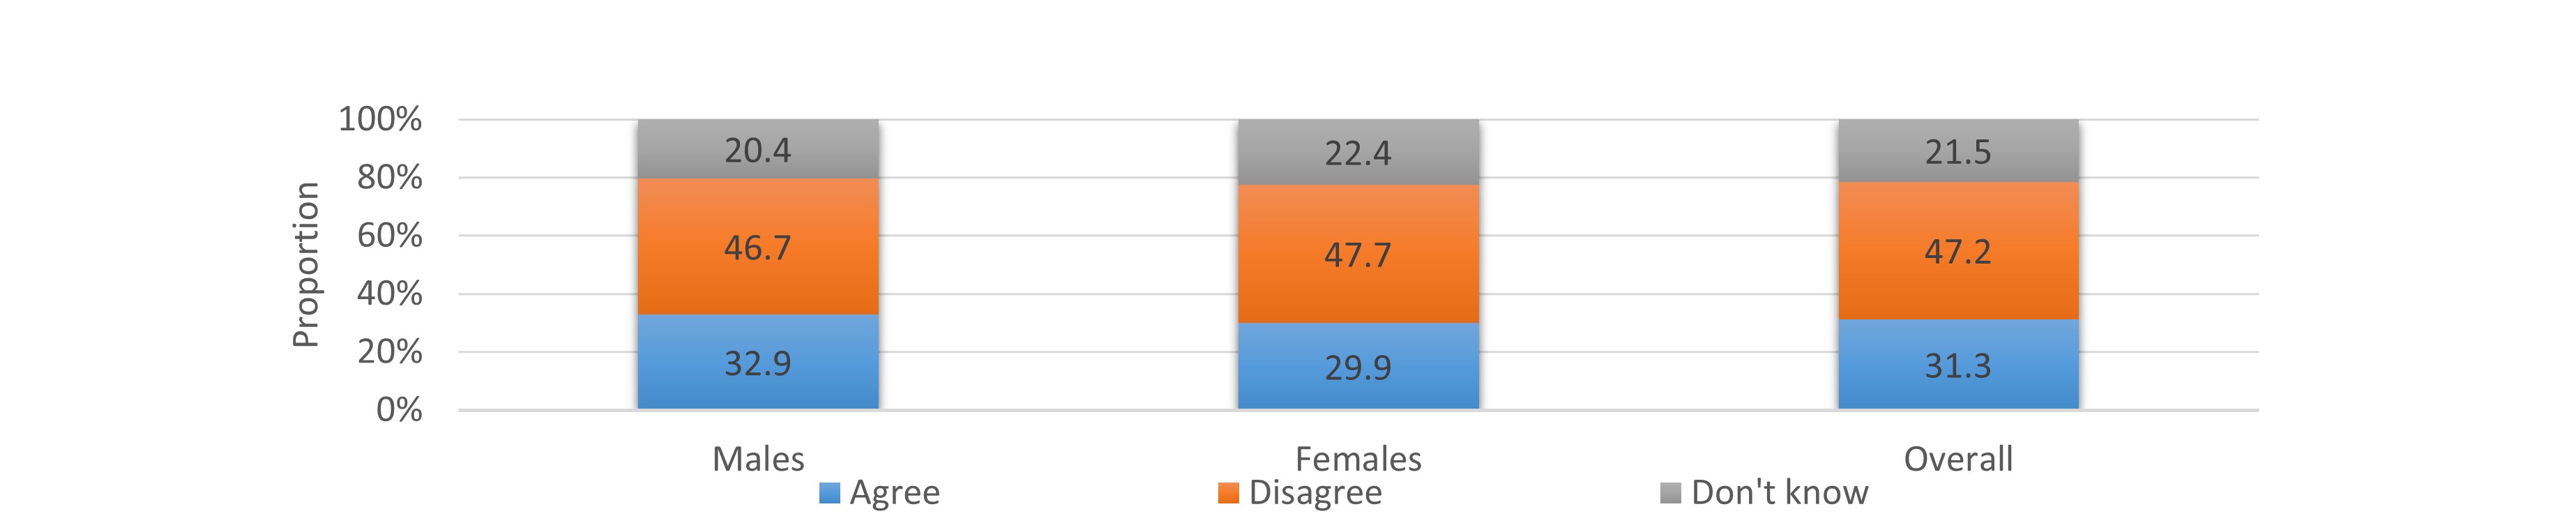 According to the Department of Health’s Population Health Survey 2020-22, 47.2% of the persons aged 15 or above disagreed with the incorrect statement “Drinking five cans of beer on a single occasion is not harmful as long as it is not a regular habit”. The corresponding proportion among females and males were 47.7% and 46.7% respectively.